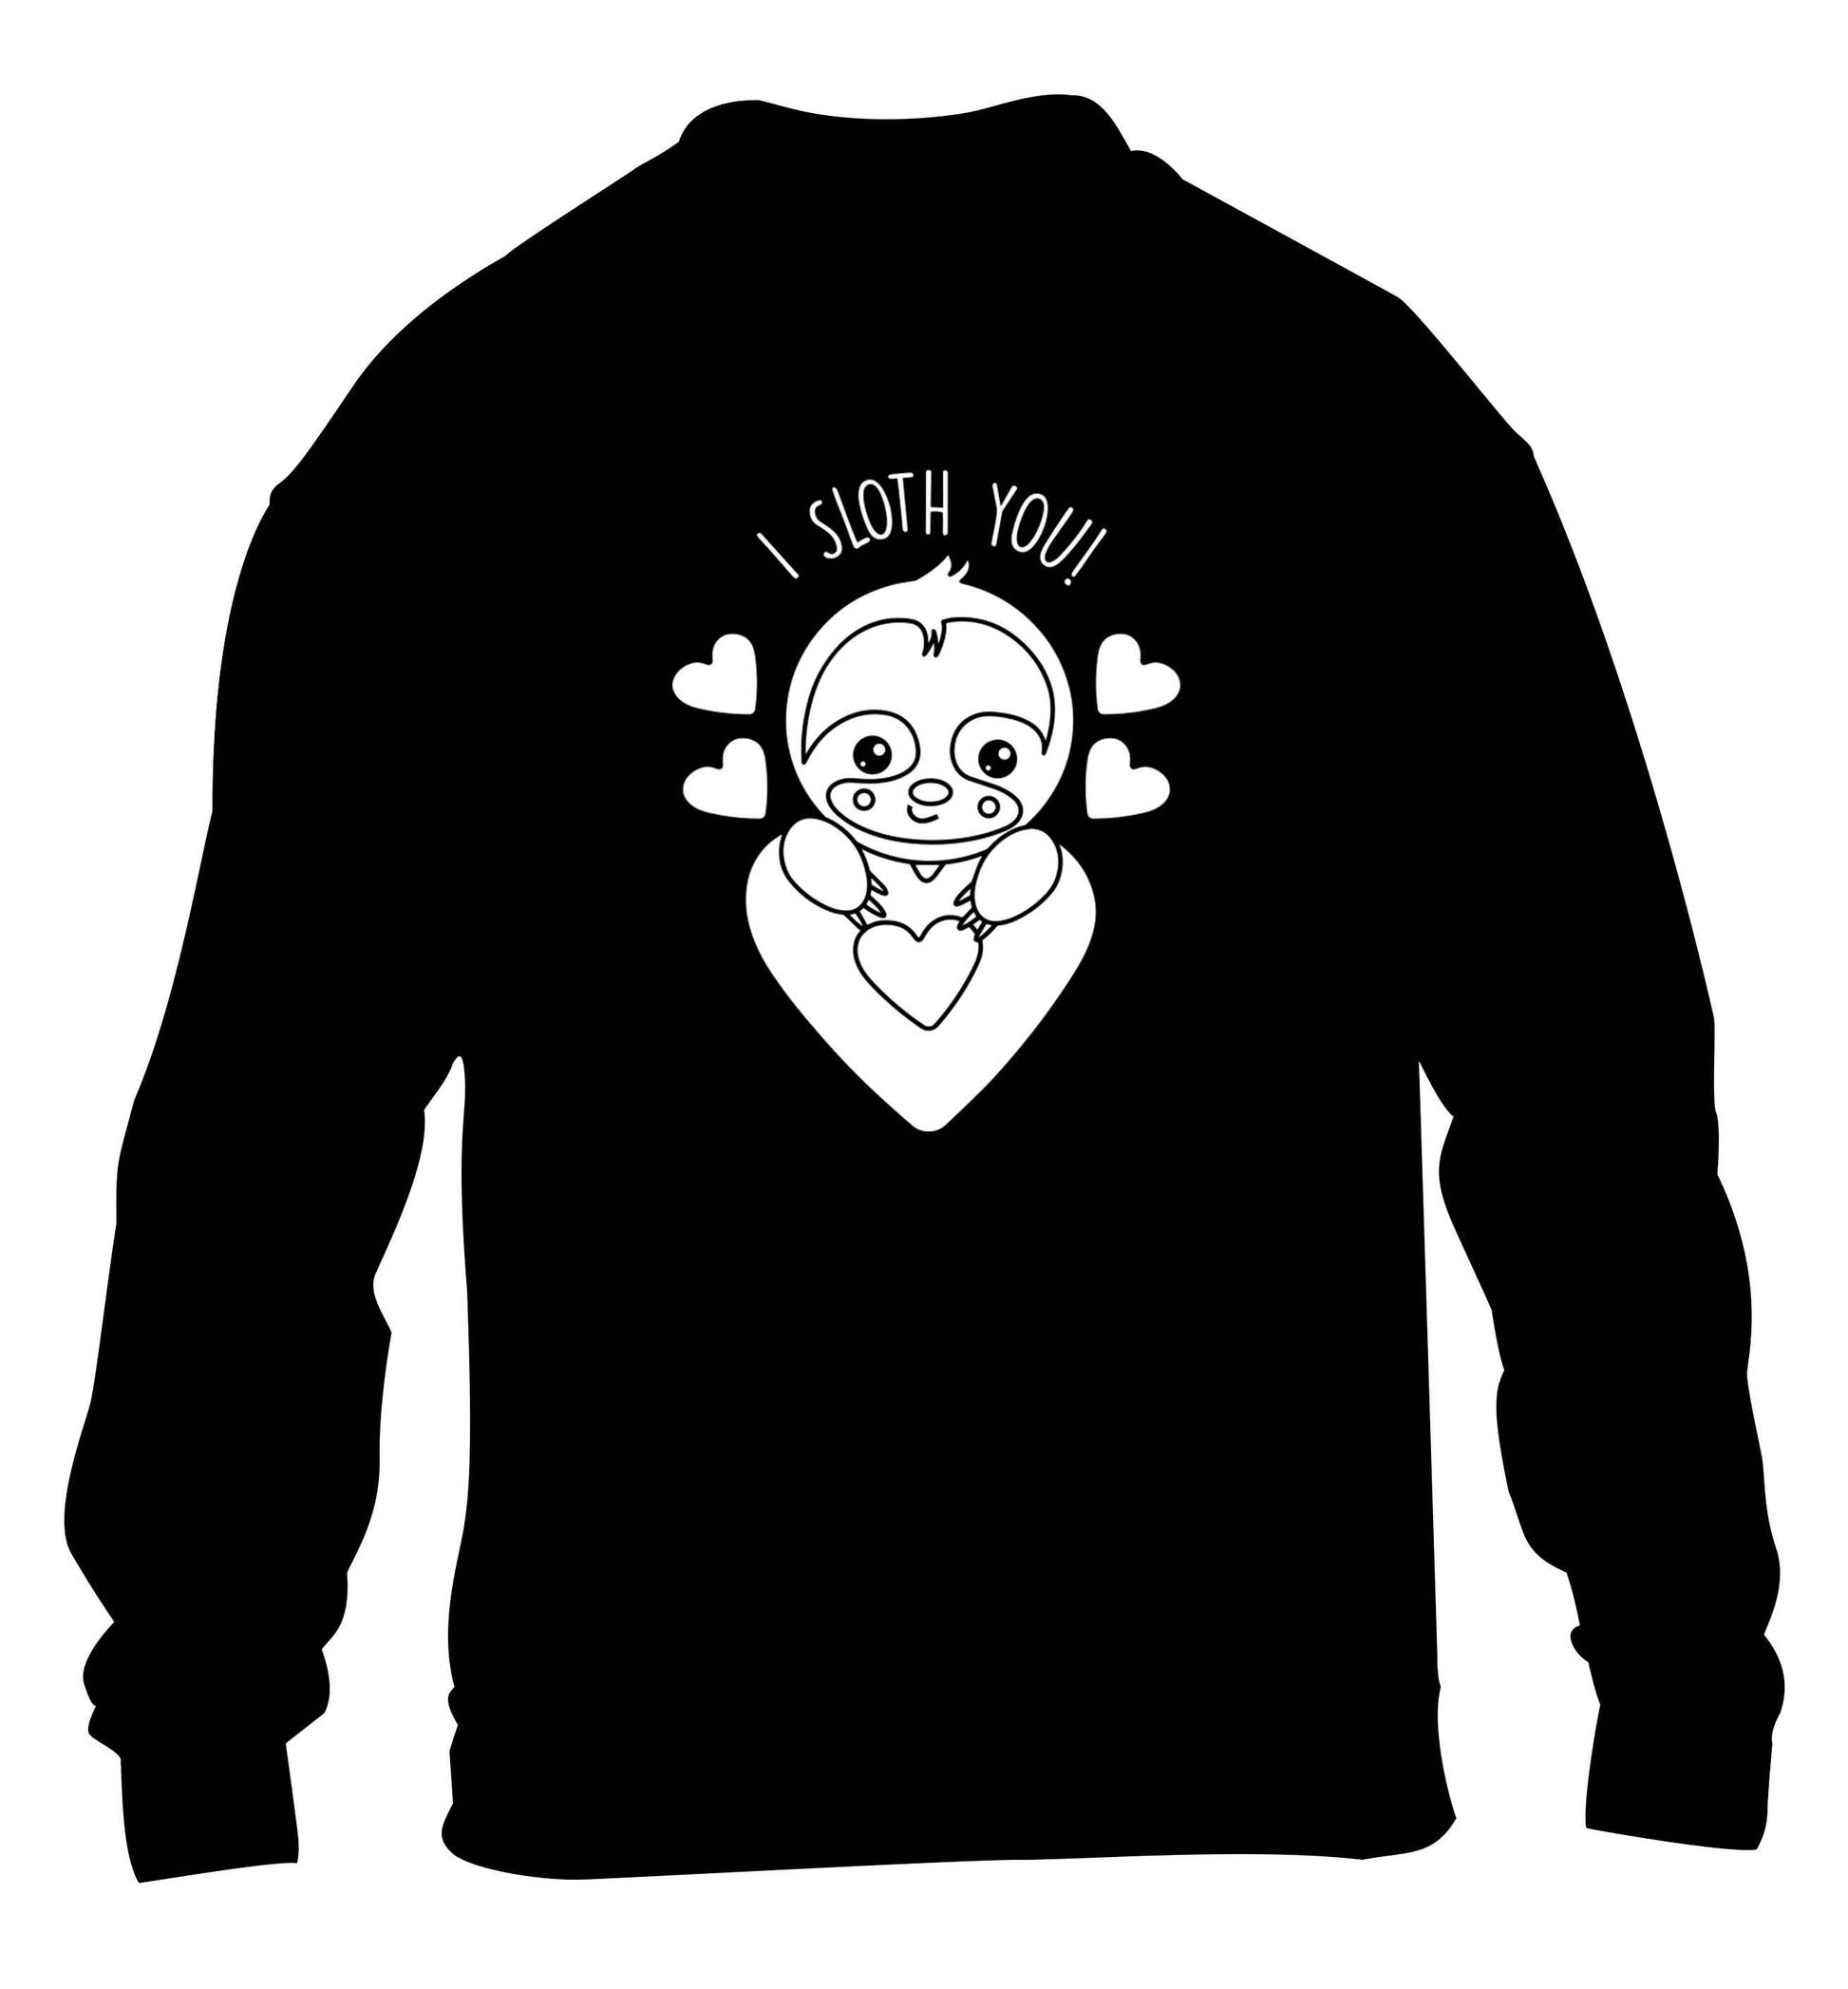 I sloth you children's black sweater 12-13 Years